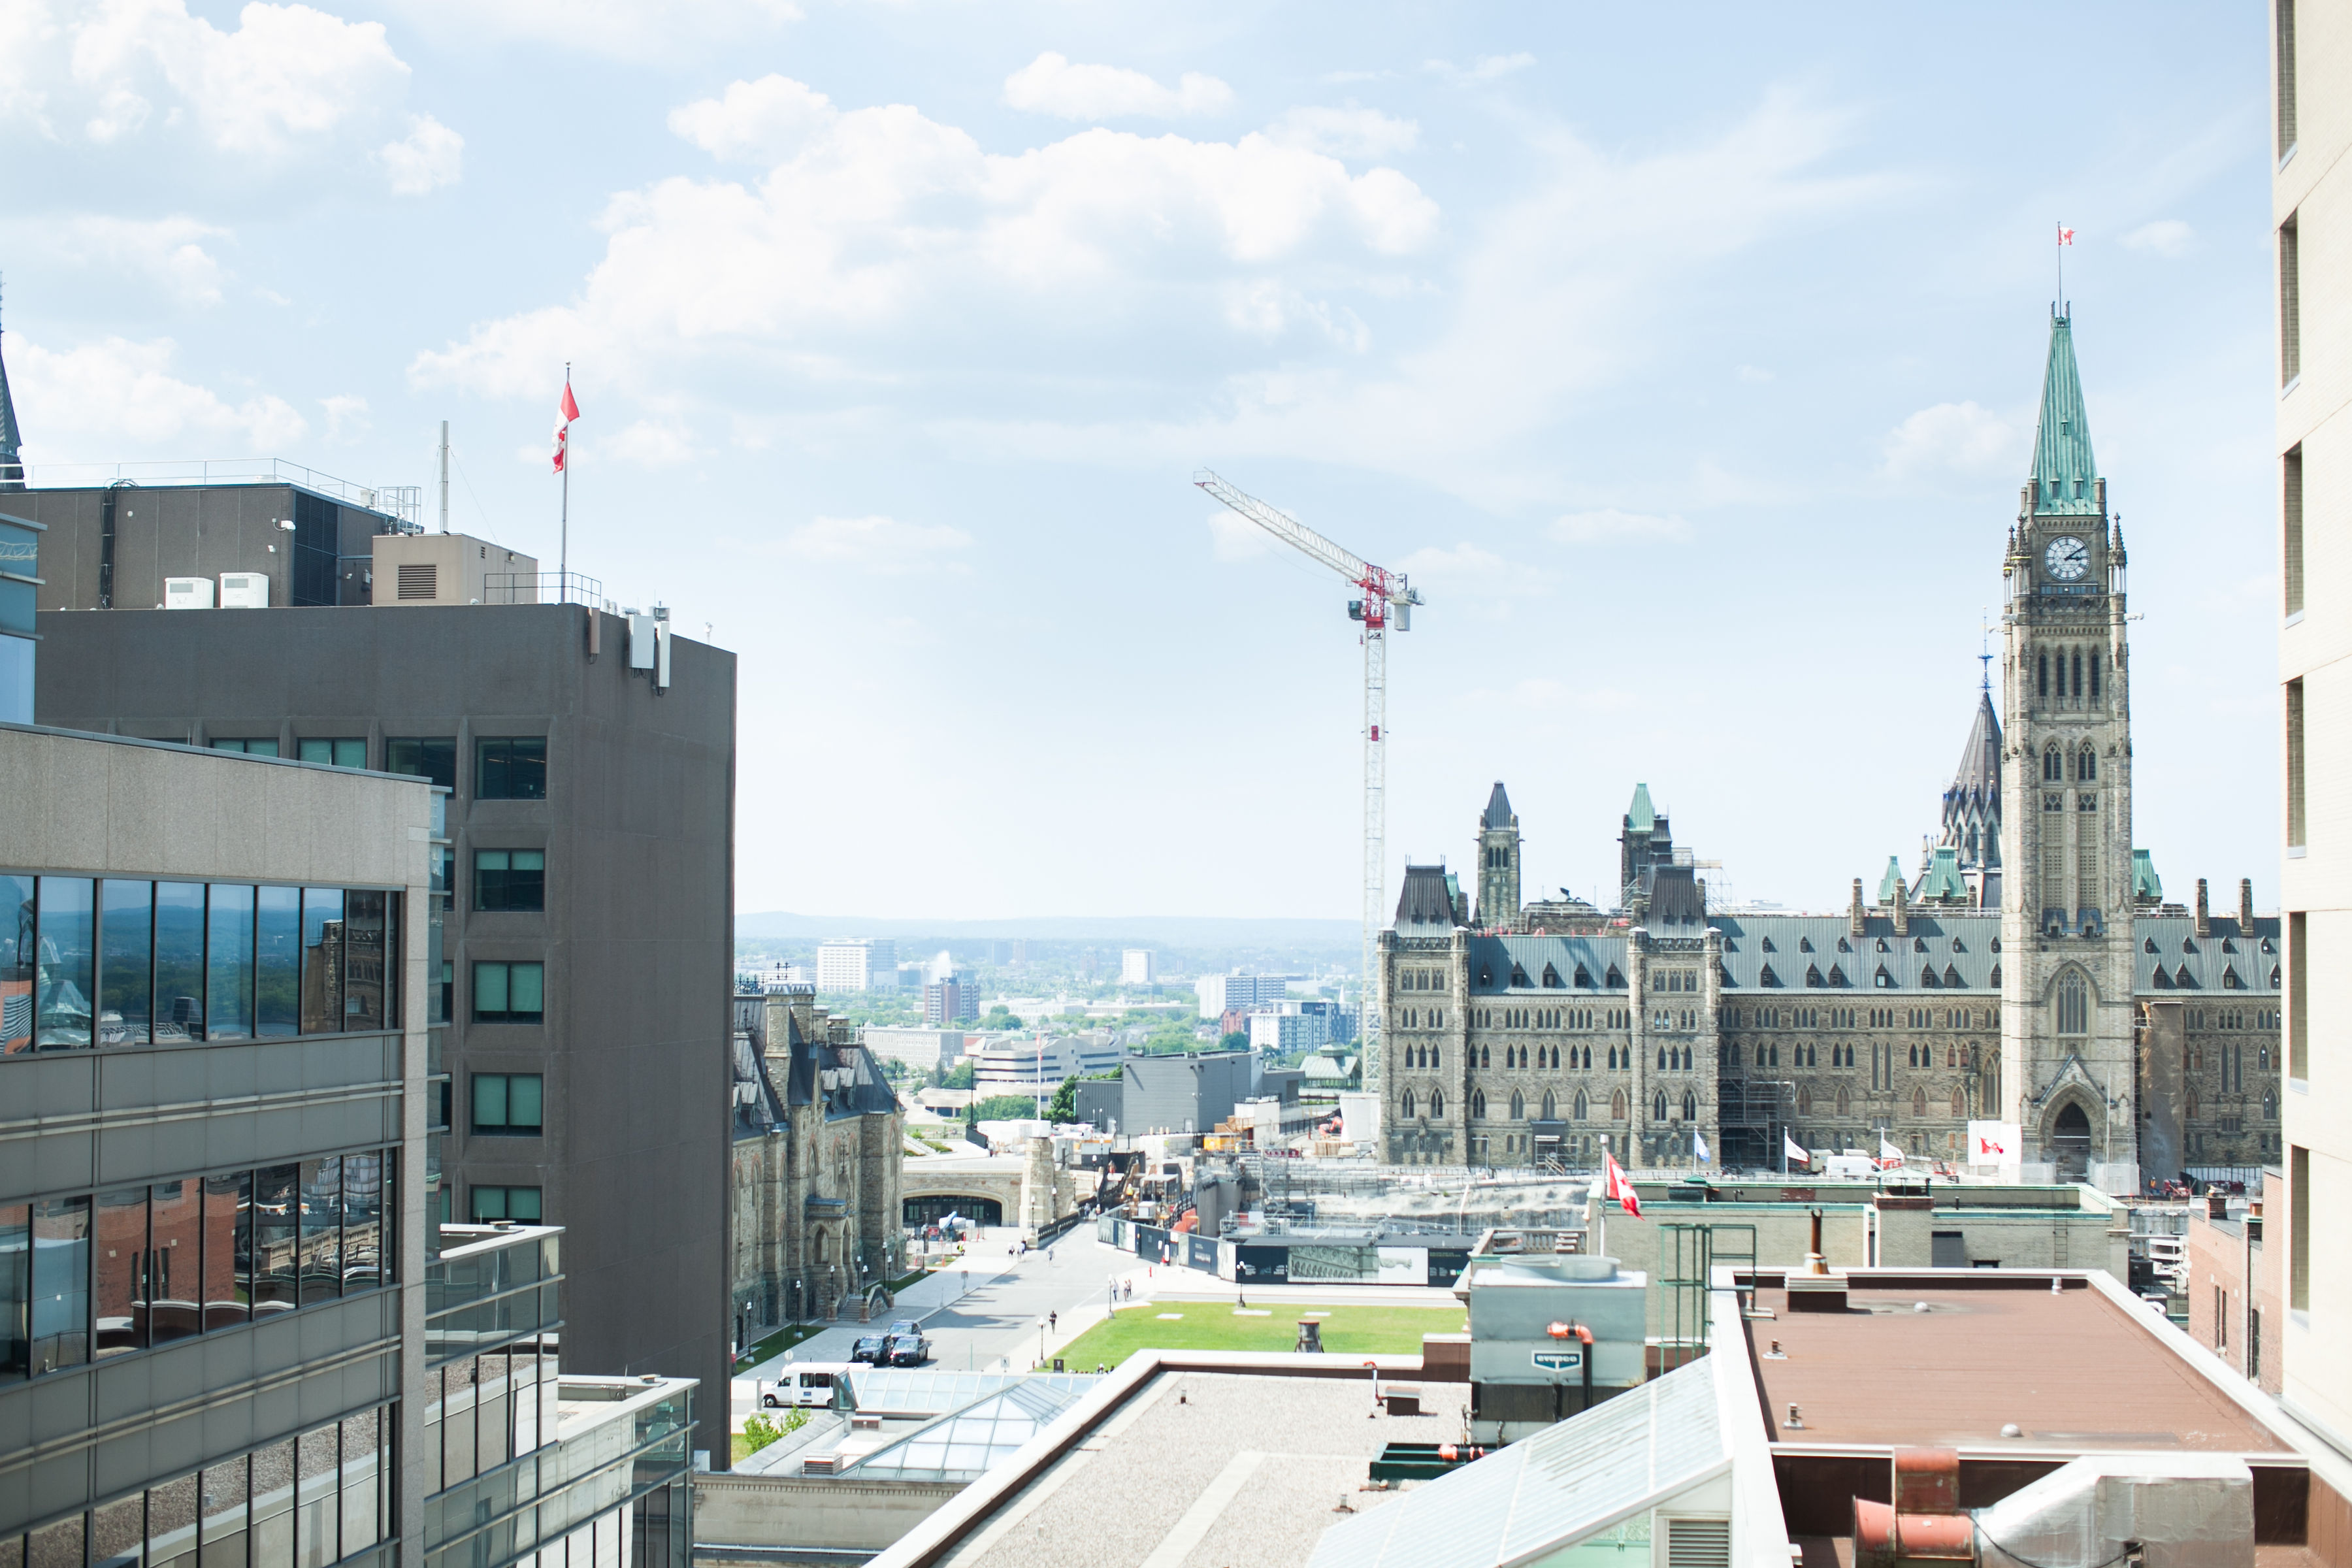 Canada's Parliament Hill area as viewed from the ULSE office in Ottawa, Ontario